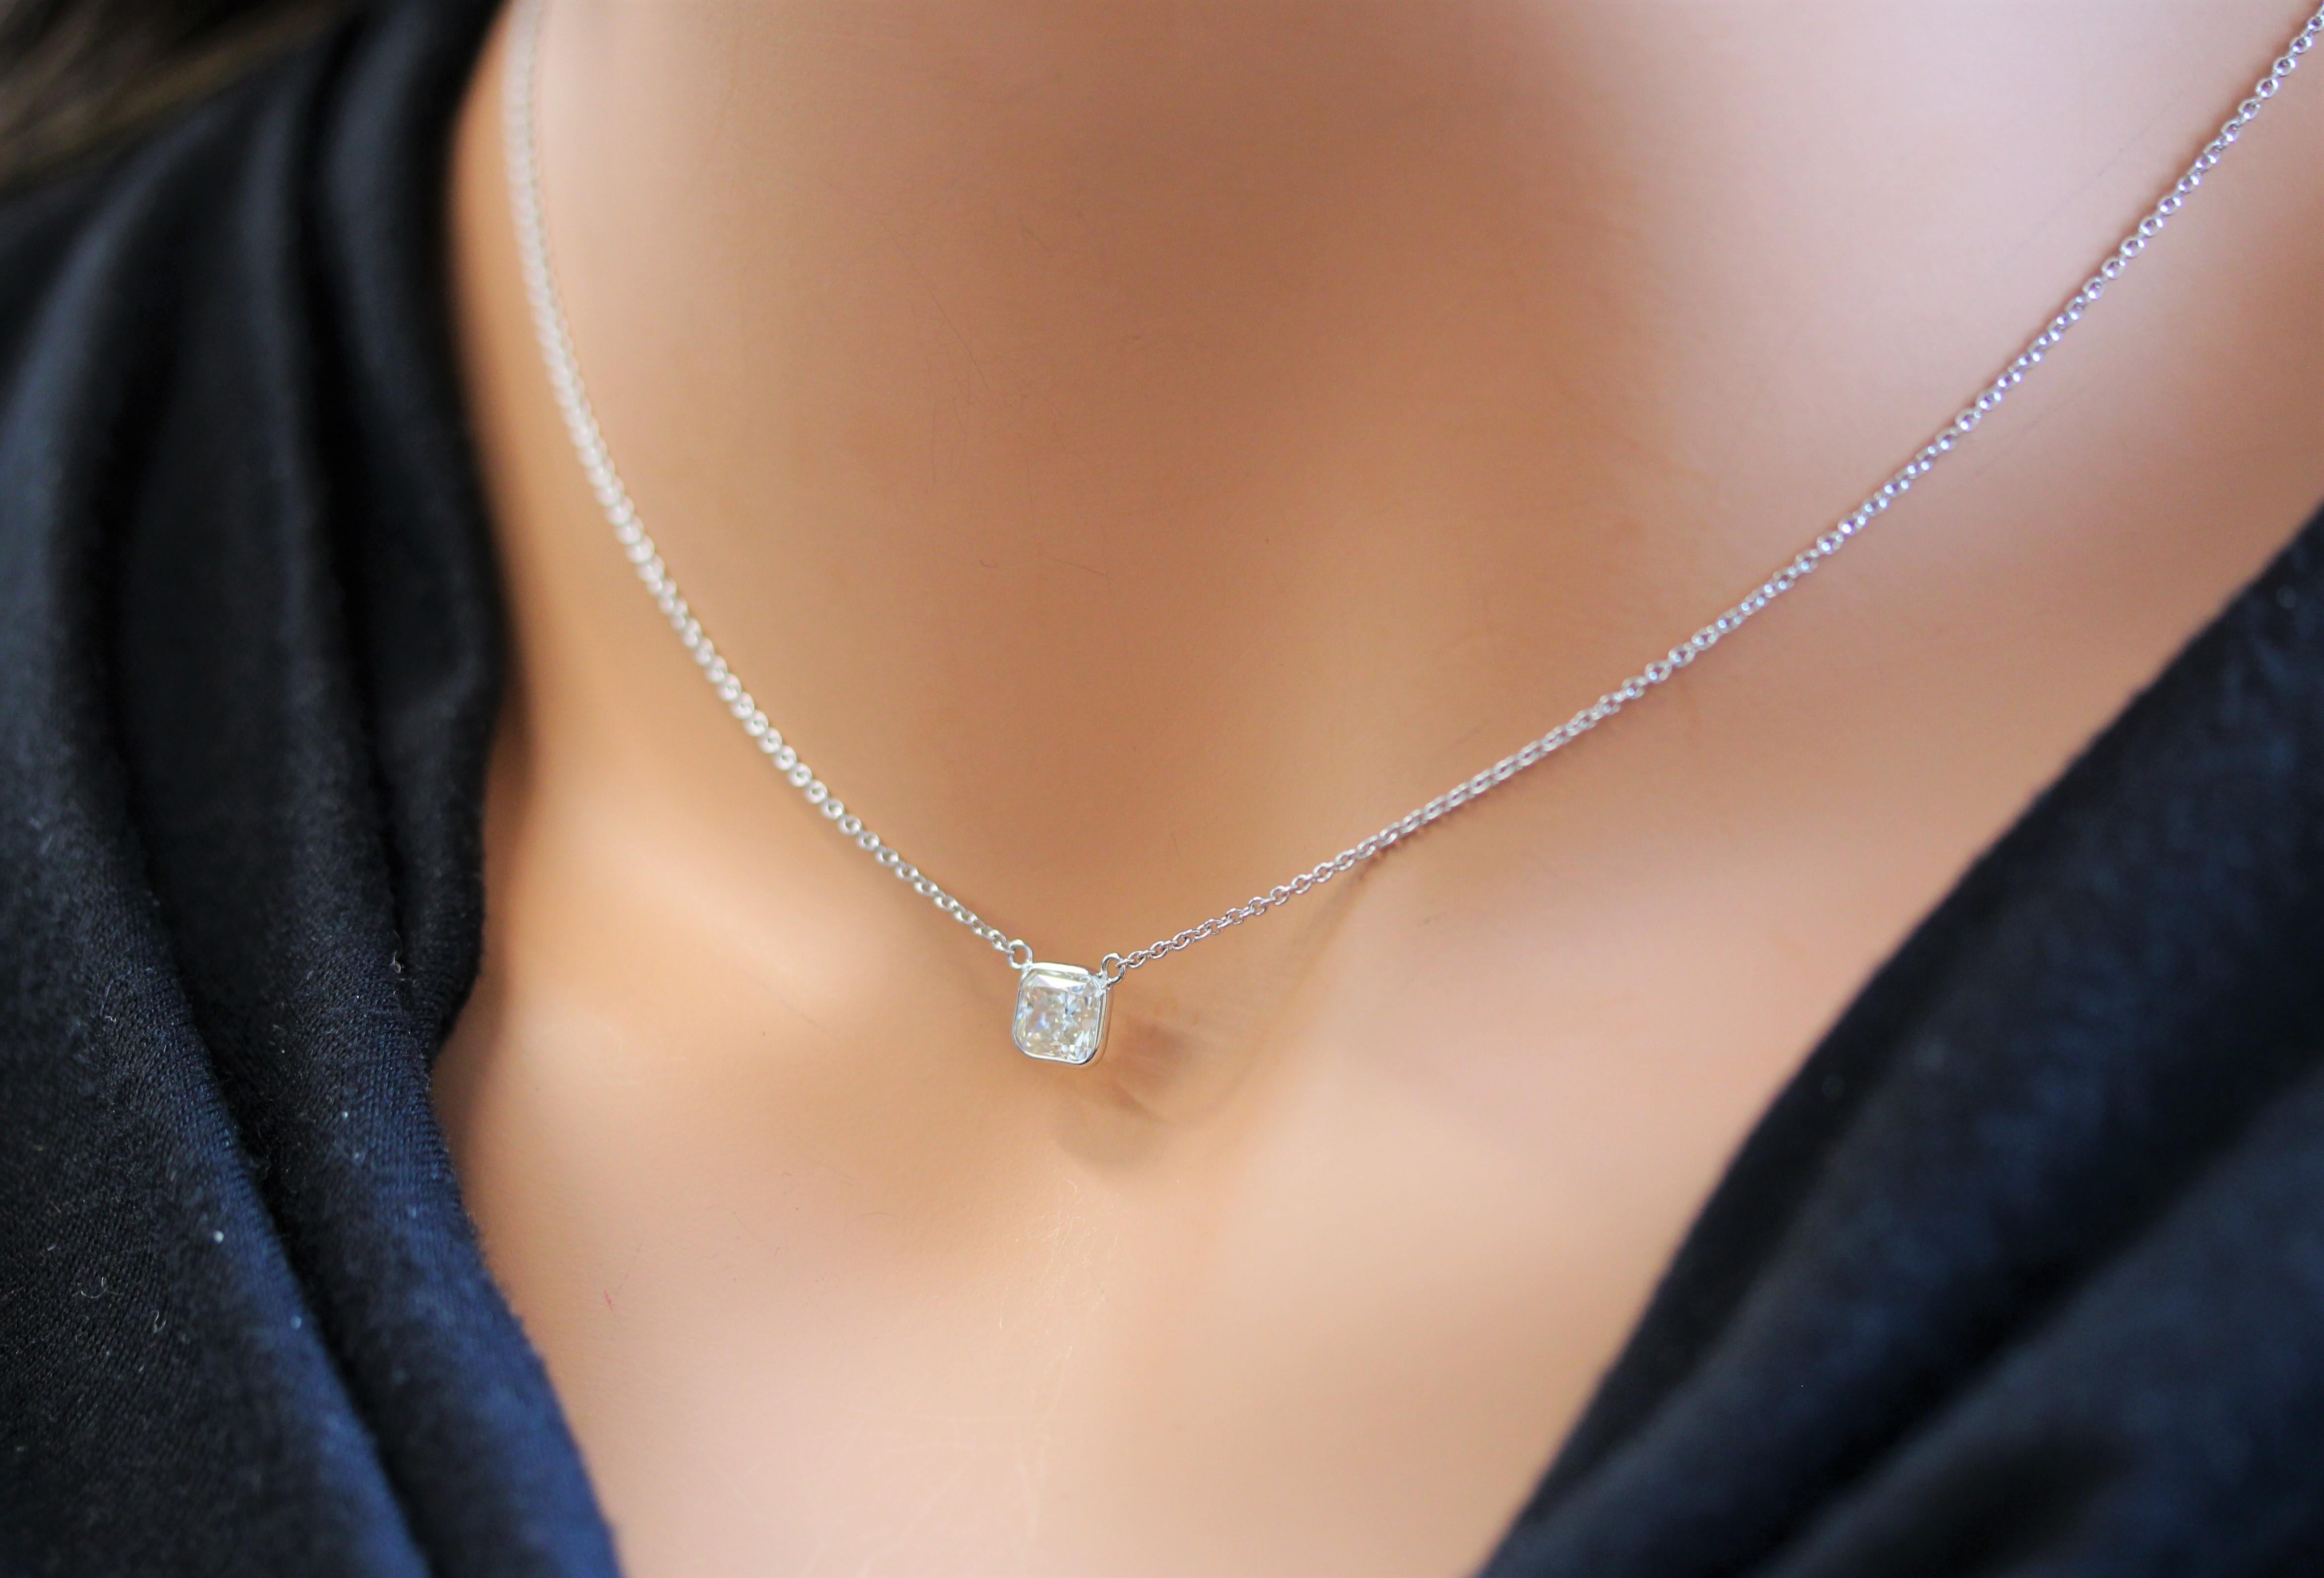 Radiant Cut 1.15 Carat Diamond Radiant Delicate Handmade Solitaire Necklace In 14k WhiteGold For Sale